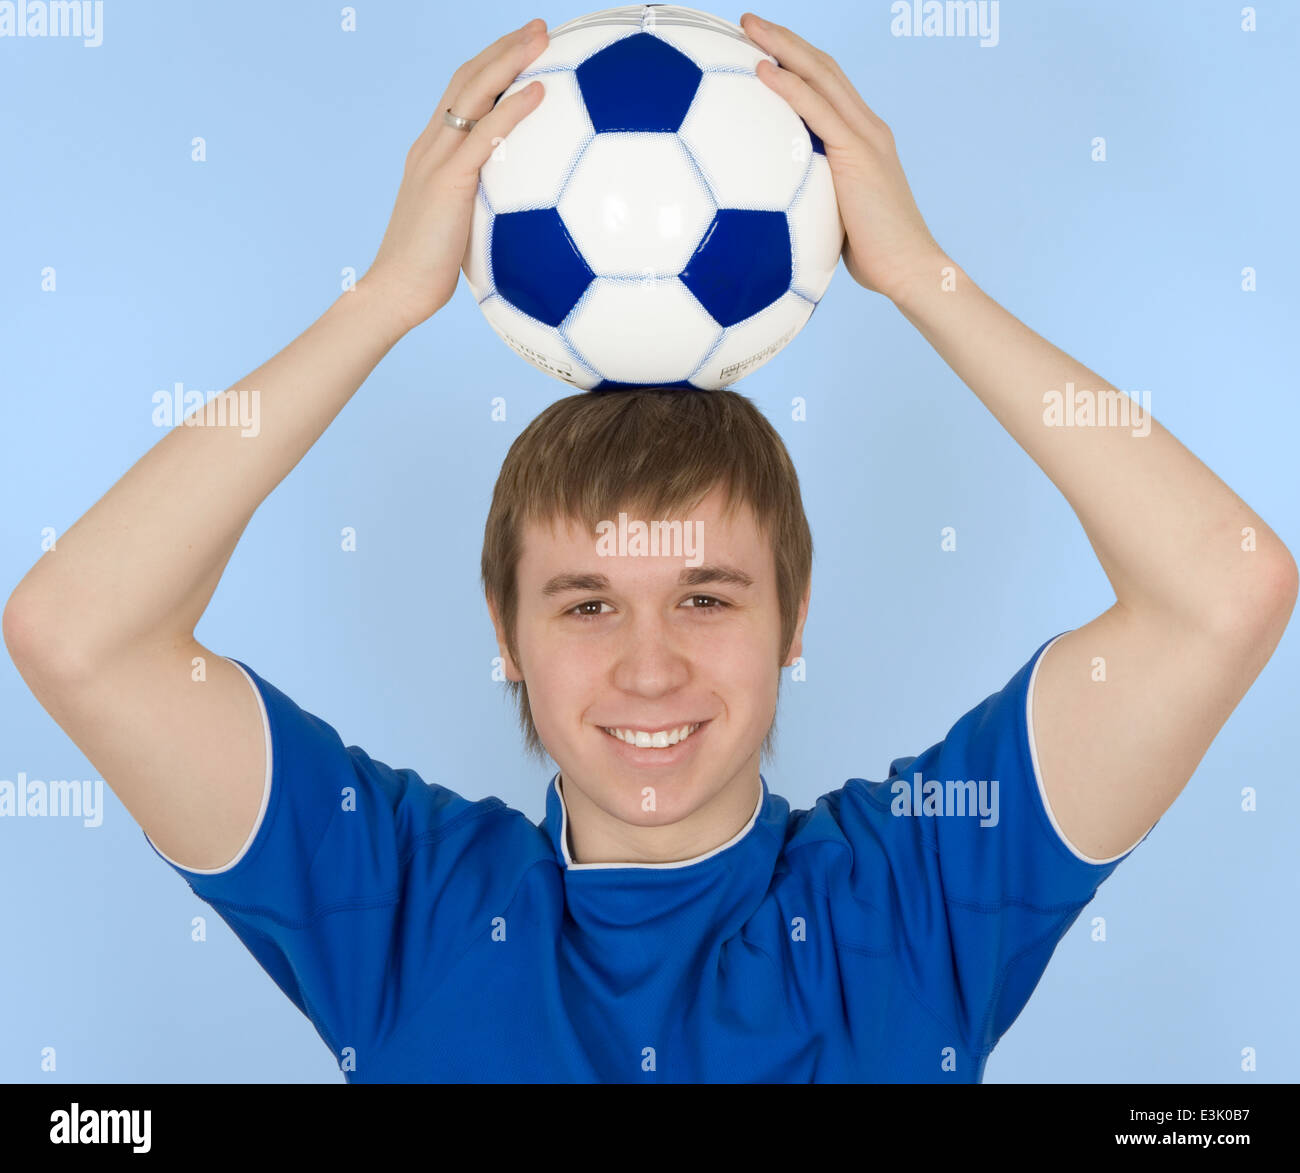 Young man holding soccer ball on head, smiling, portrait Stock Photo